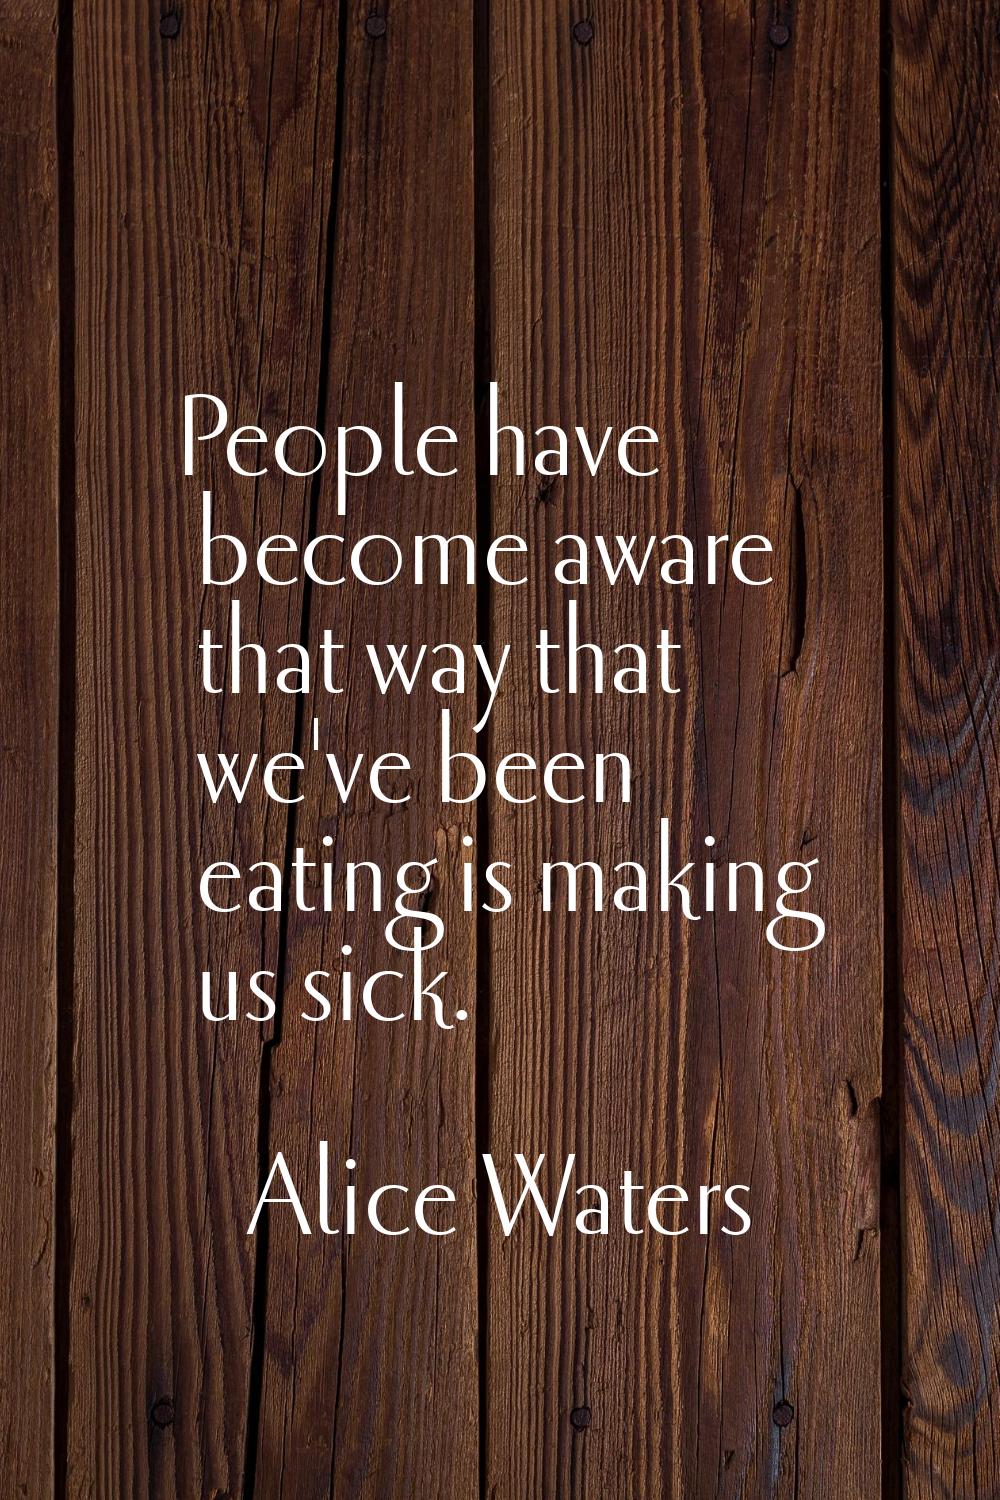 People have become aware that way that we've been eating is making us sick.